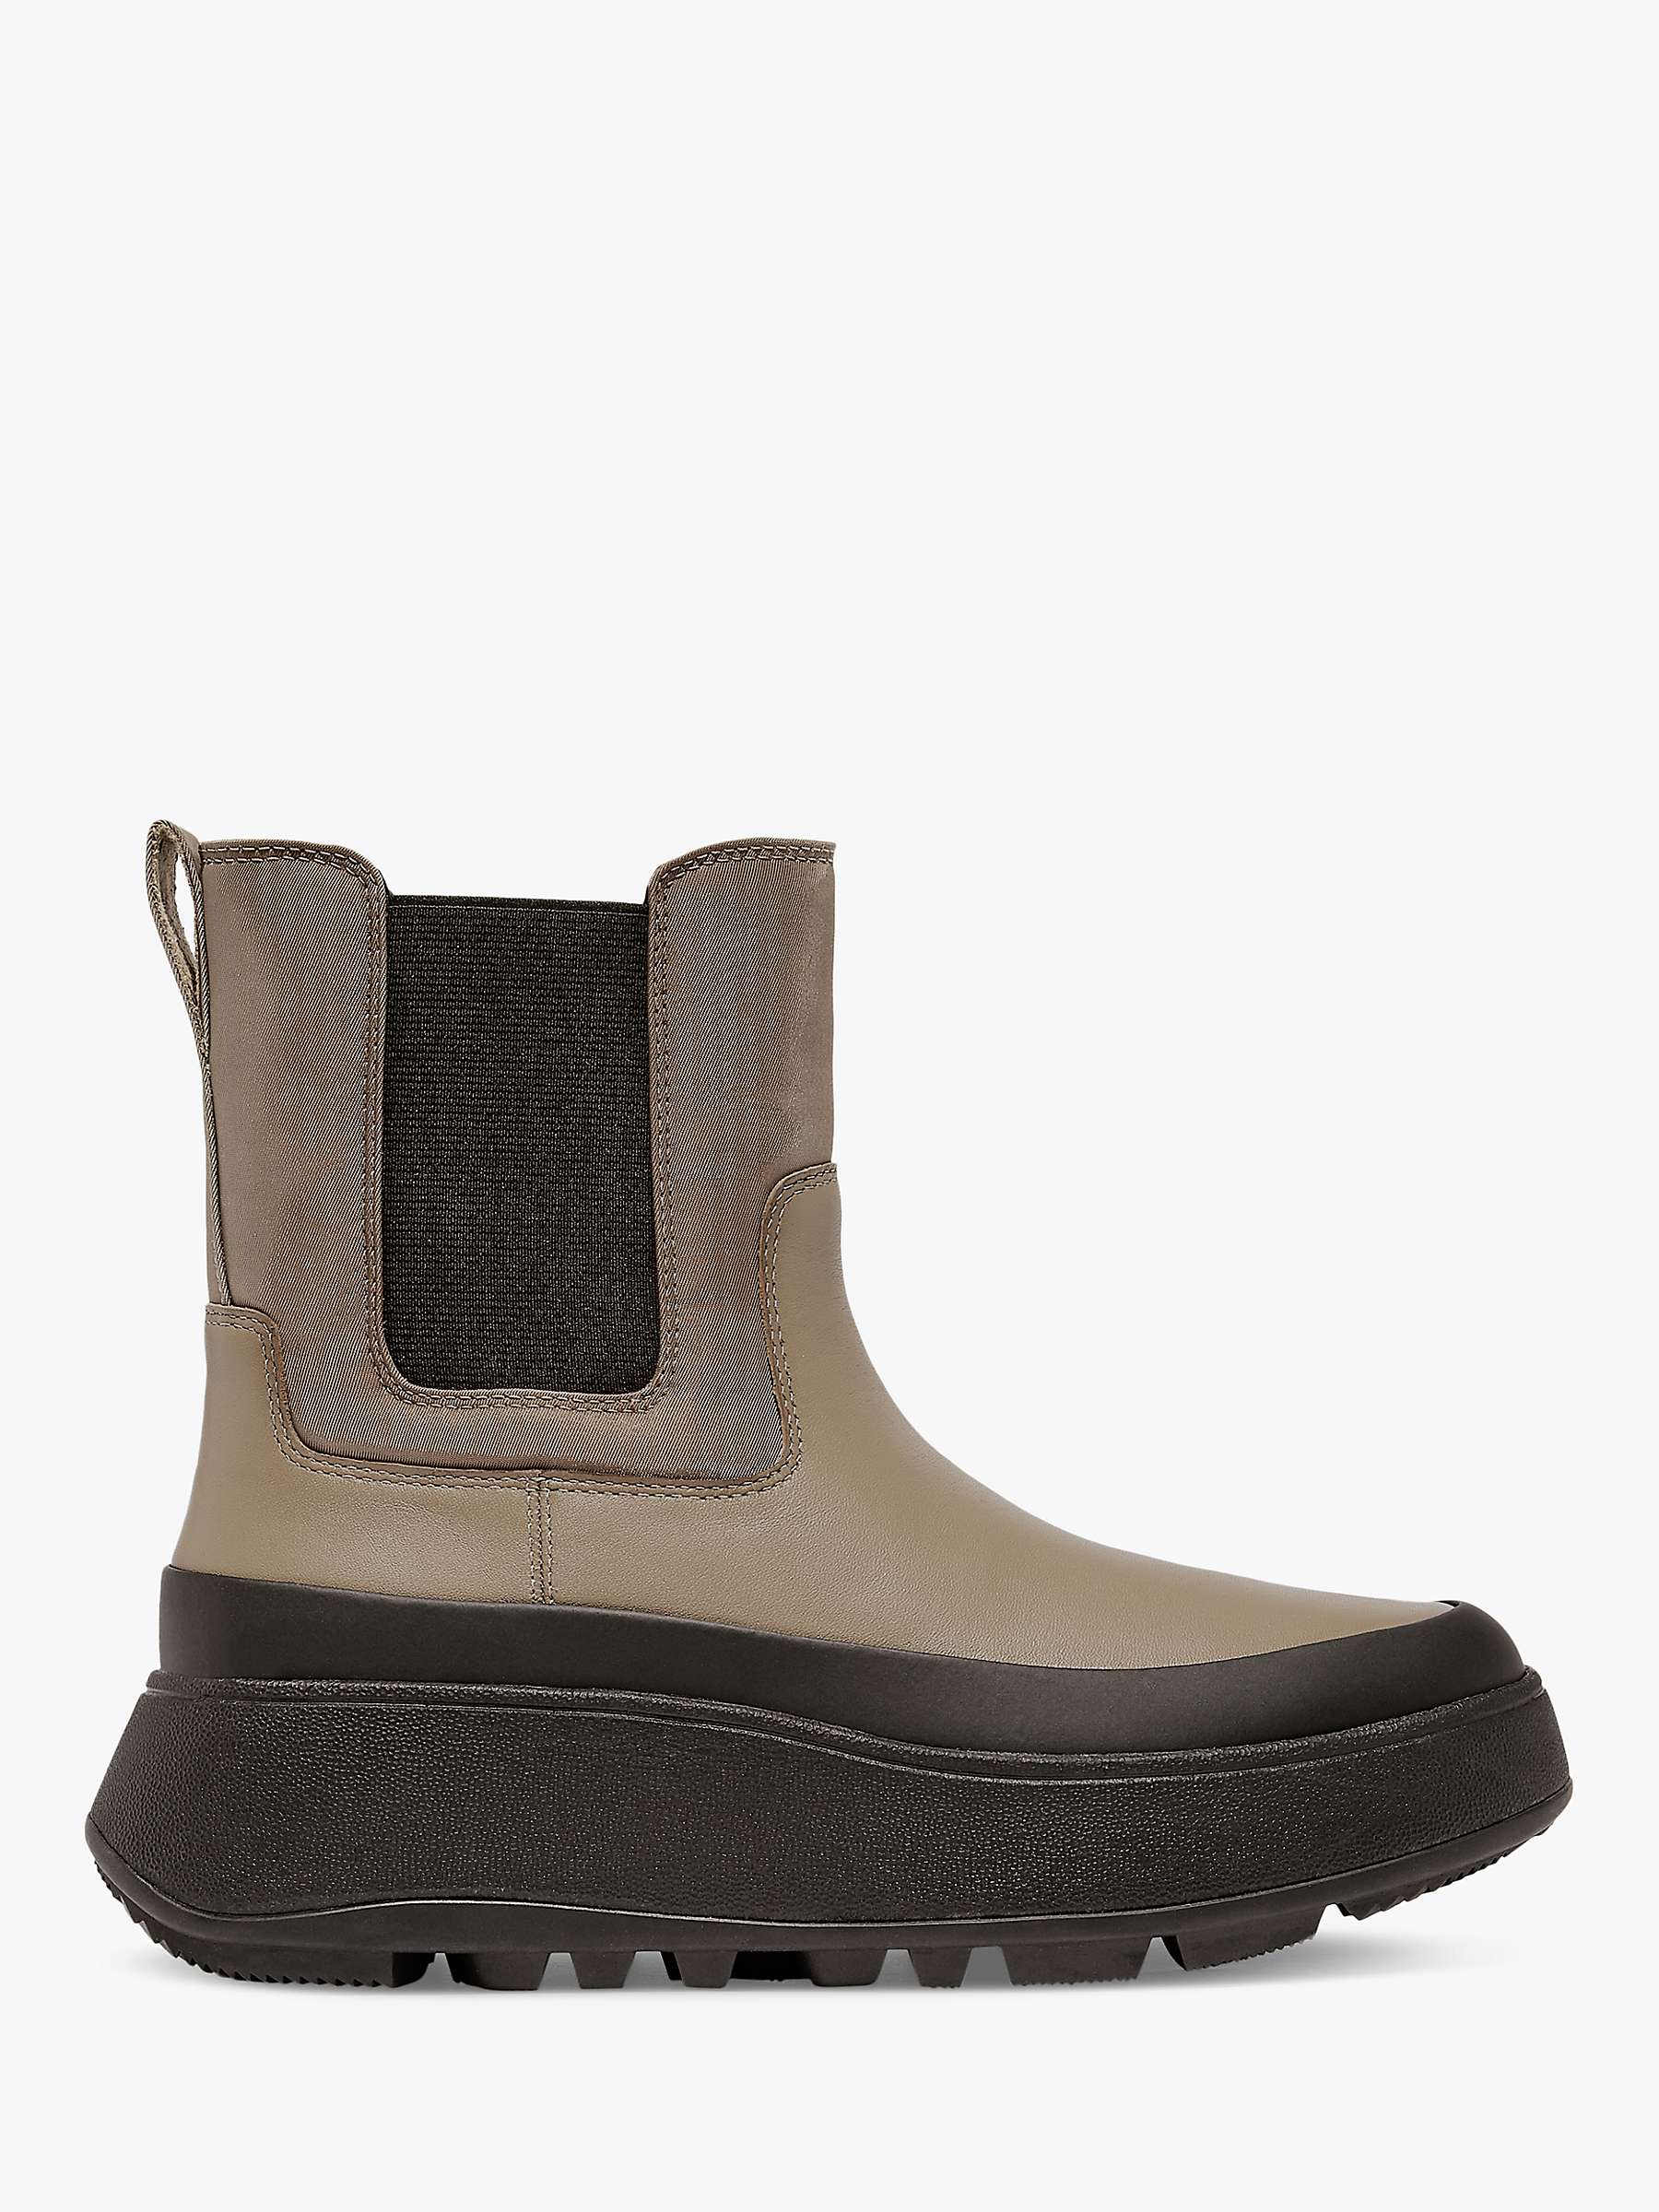 Buy FitFlop Water Resistant Fabric/Leather Flatform Chelsea Boots, Minky Grey Online at johnlewis.com